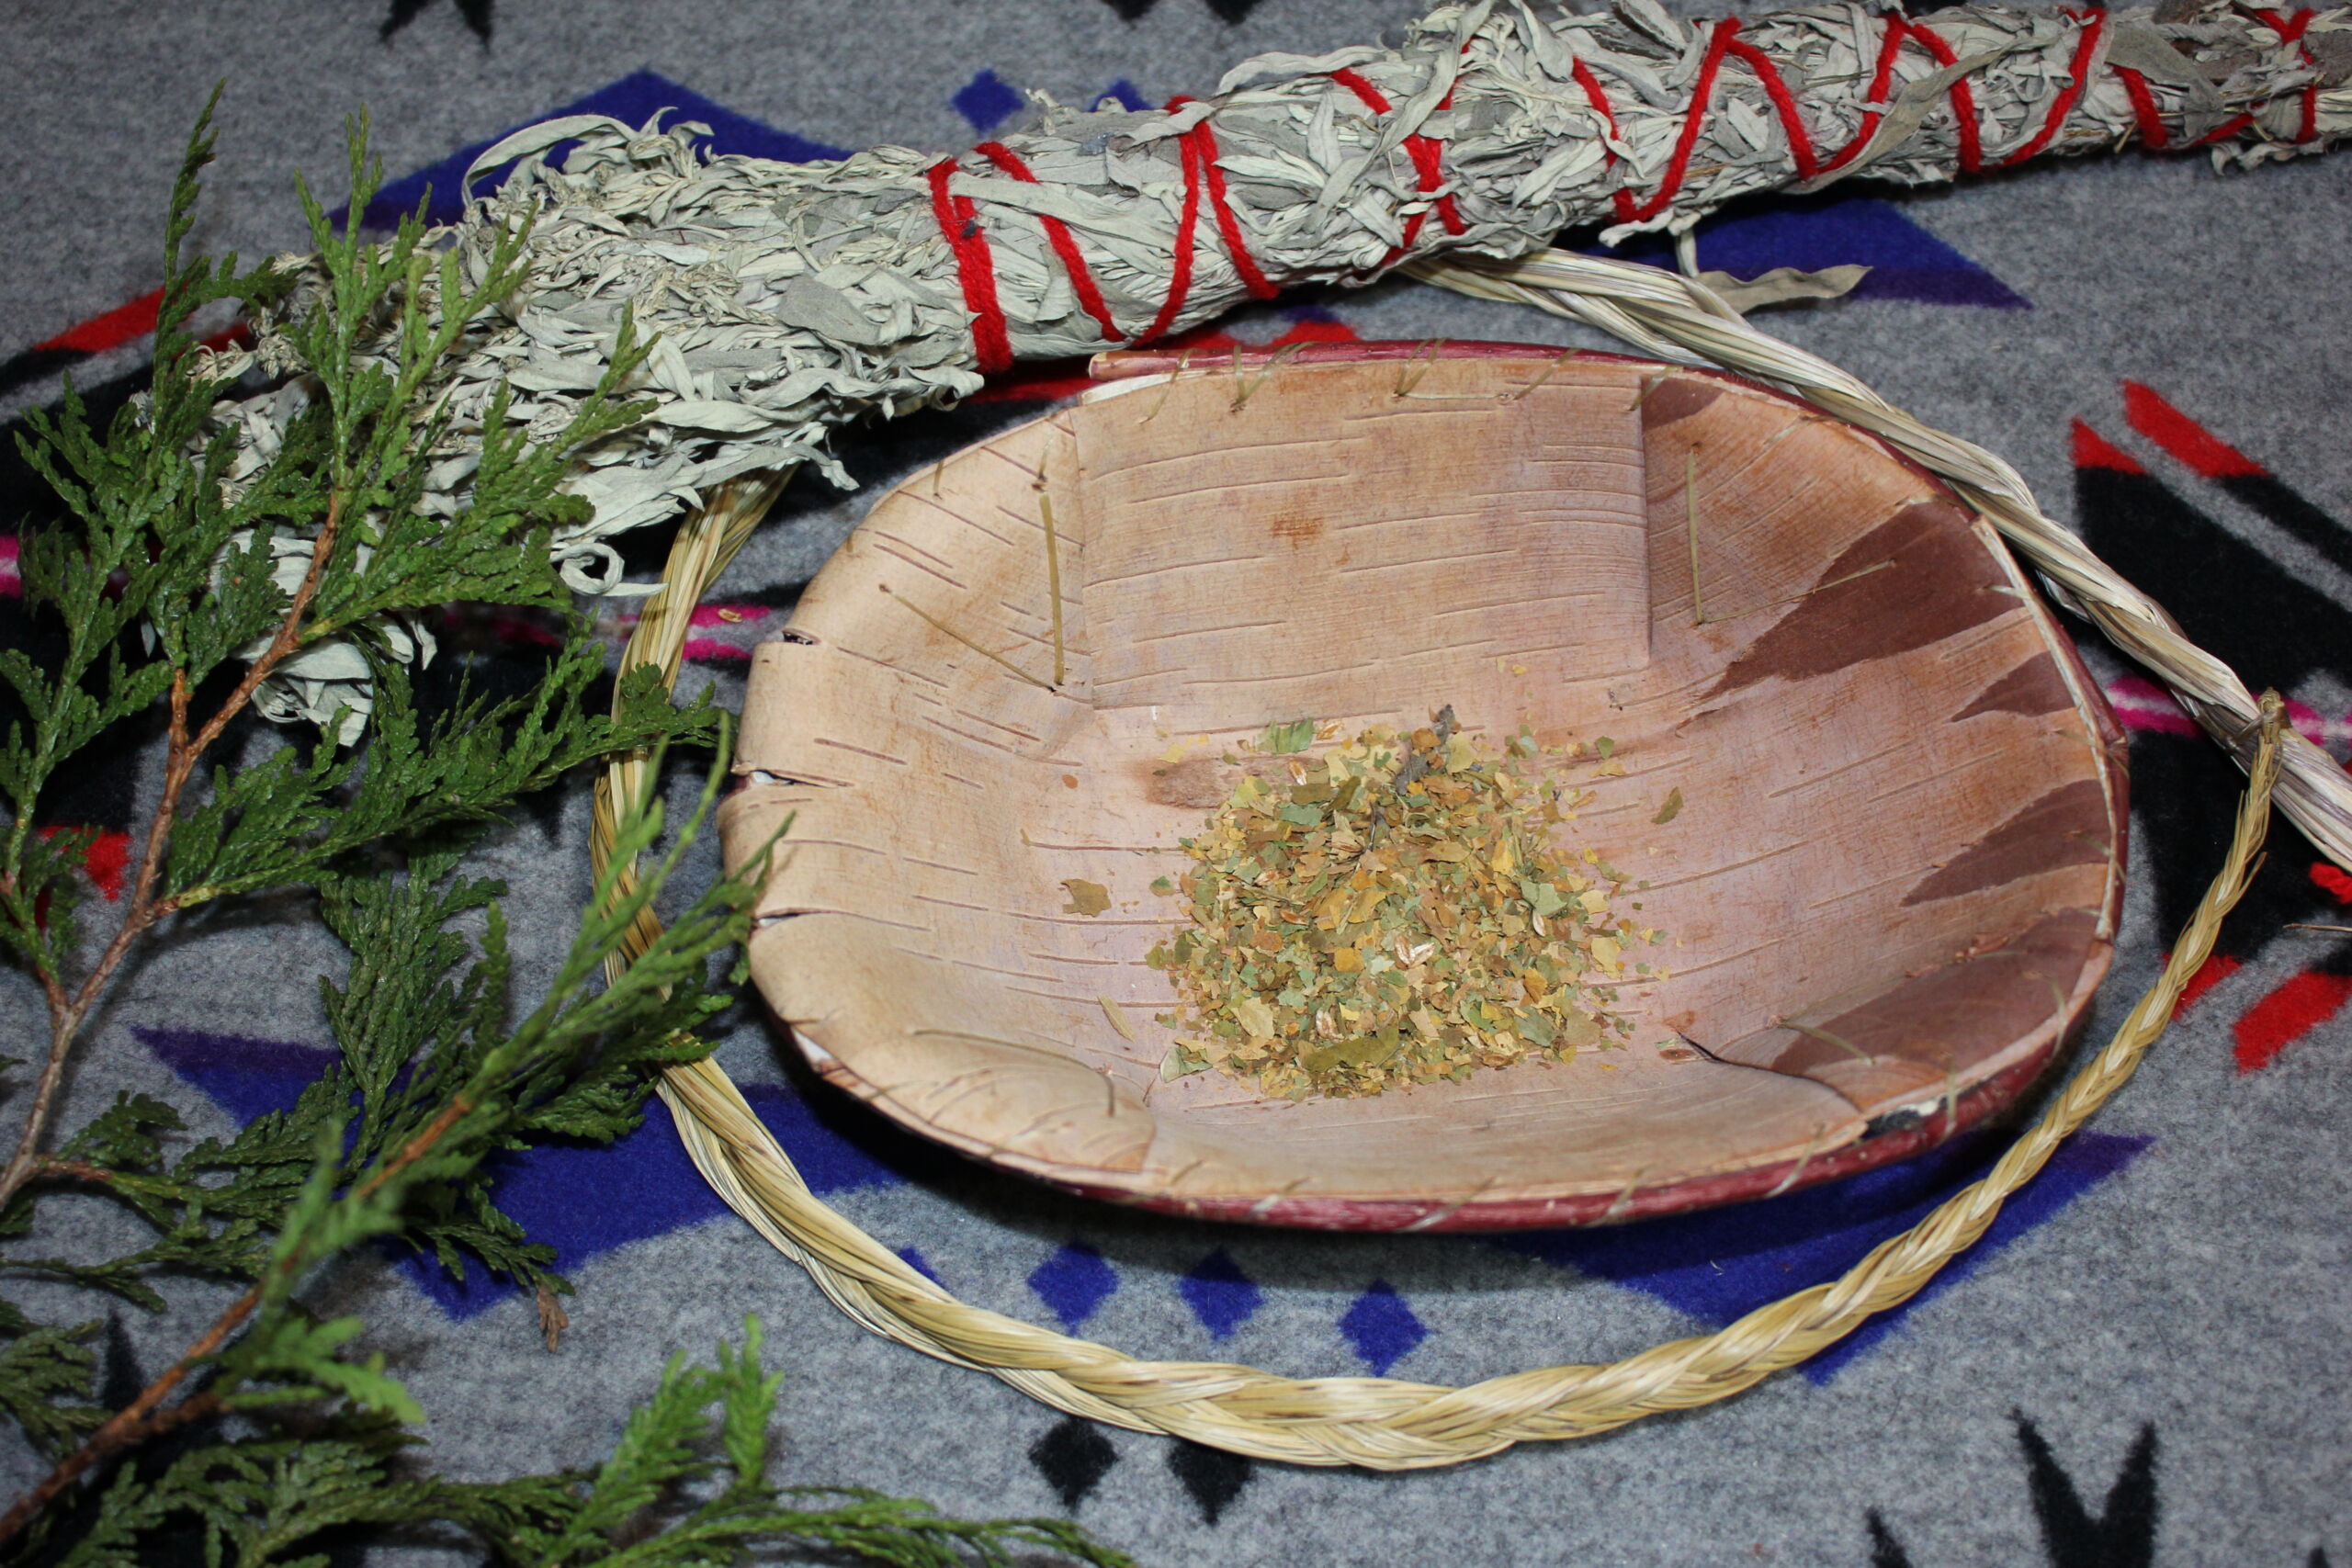 4 sacred medicines in a bowl